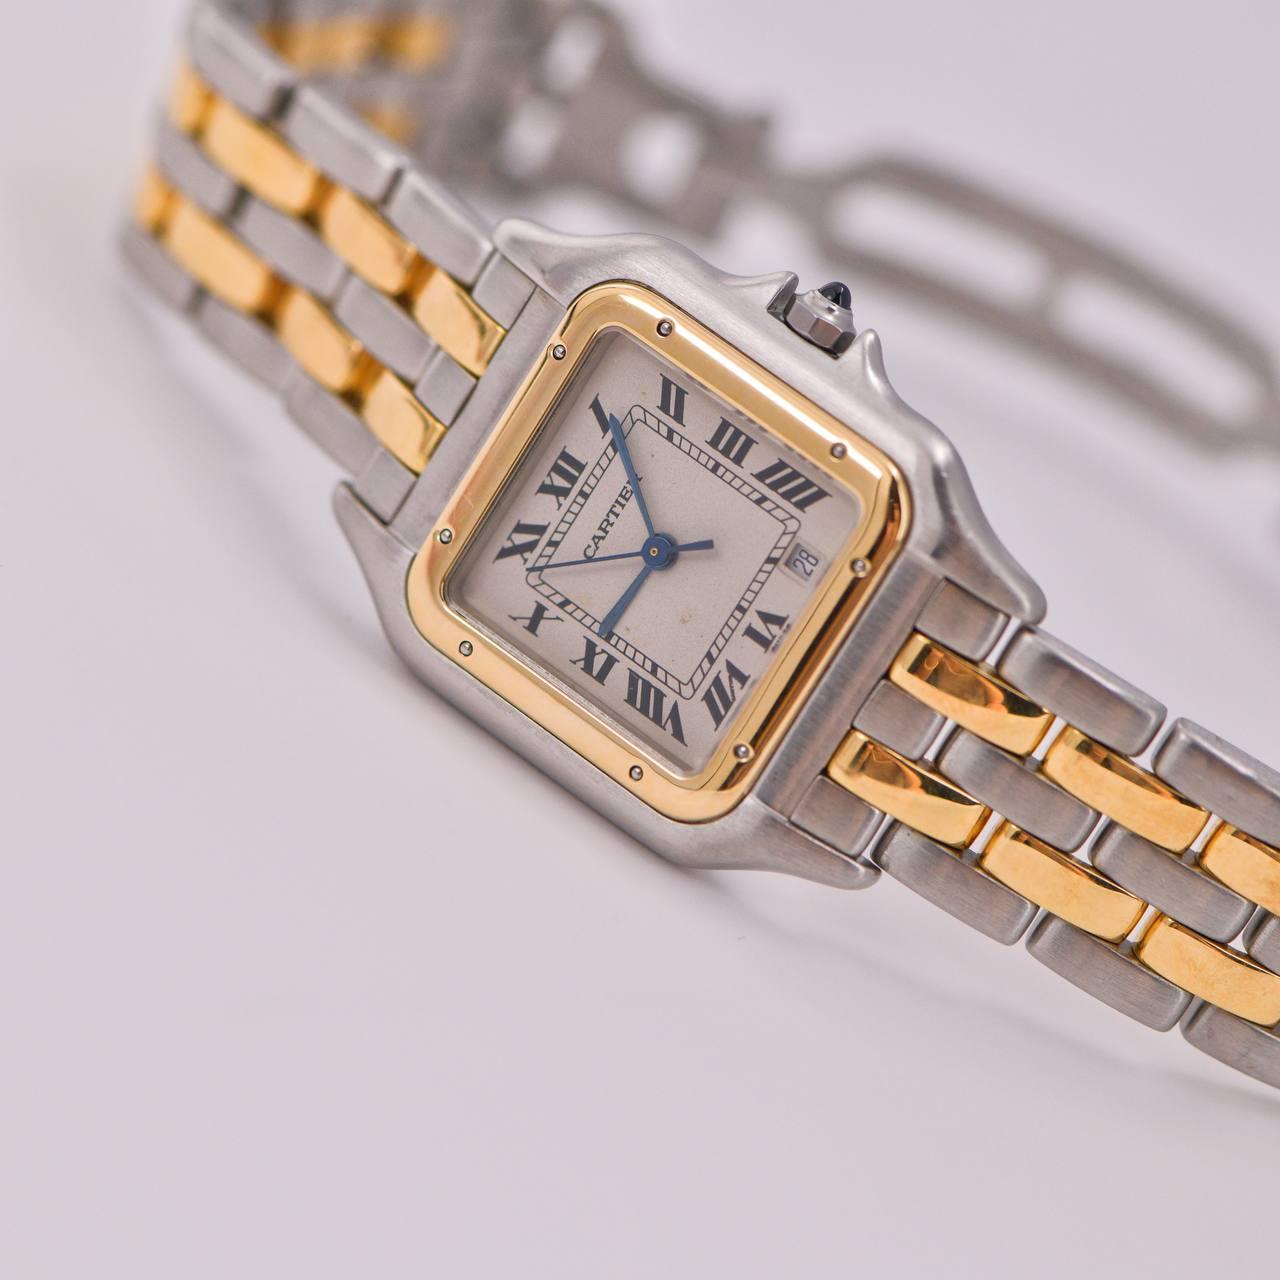 Cartier Panthère Medium Model Steel & Rose Gold Watch W2PN0007 In Excellent Condition For Sale In Banbury, GB